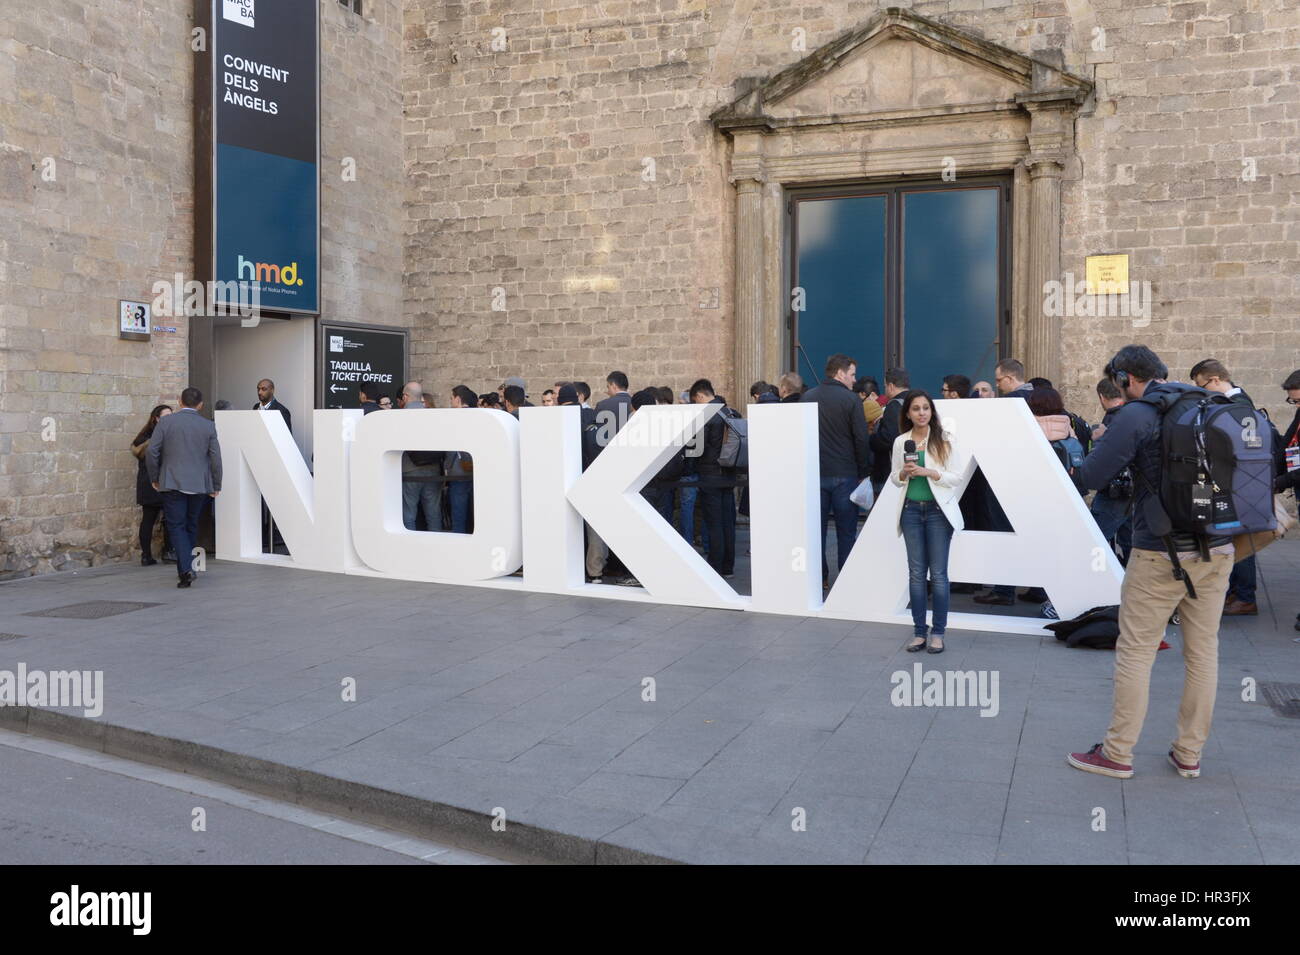 Barcelona, Spain. 26th Feb, 2017. Journalists and experts at the Mobile World Congress in Barcelona, Spain, 26 February 2017. HMD Global acquired the rights to Nokia and was presenting three new smartphones and a new edition of the classic Nokia 3310 at the show. Photo: Andrej Sokolow/dpa/Alamy Live News Stock Photo